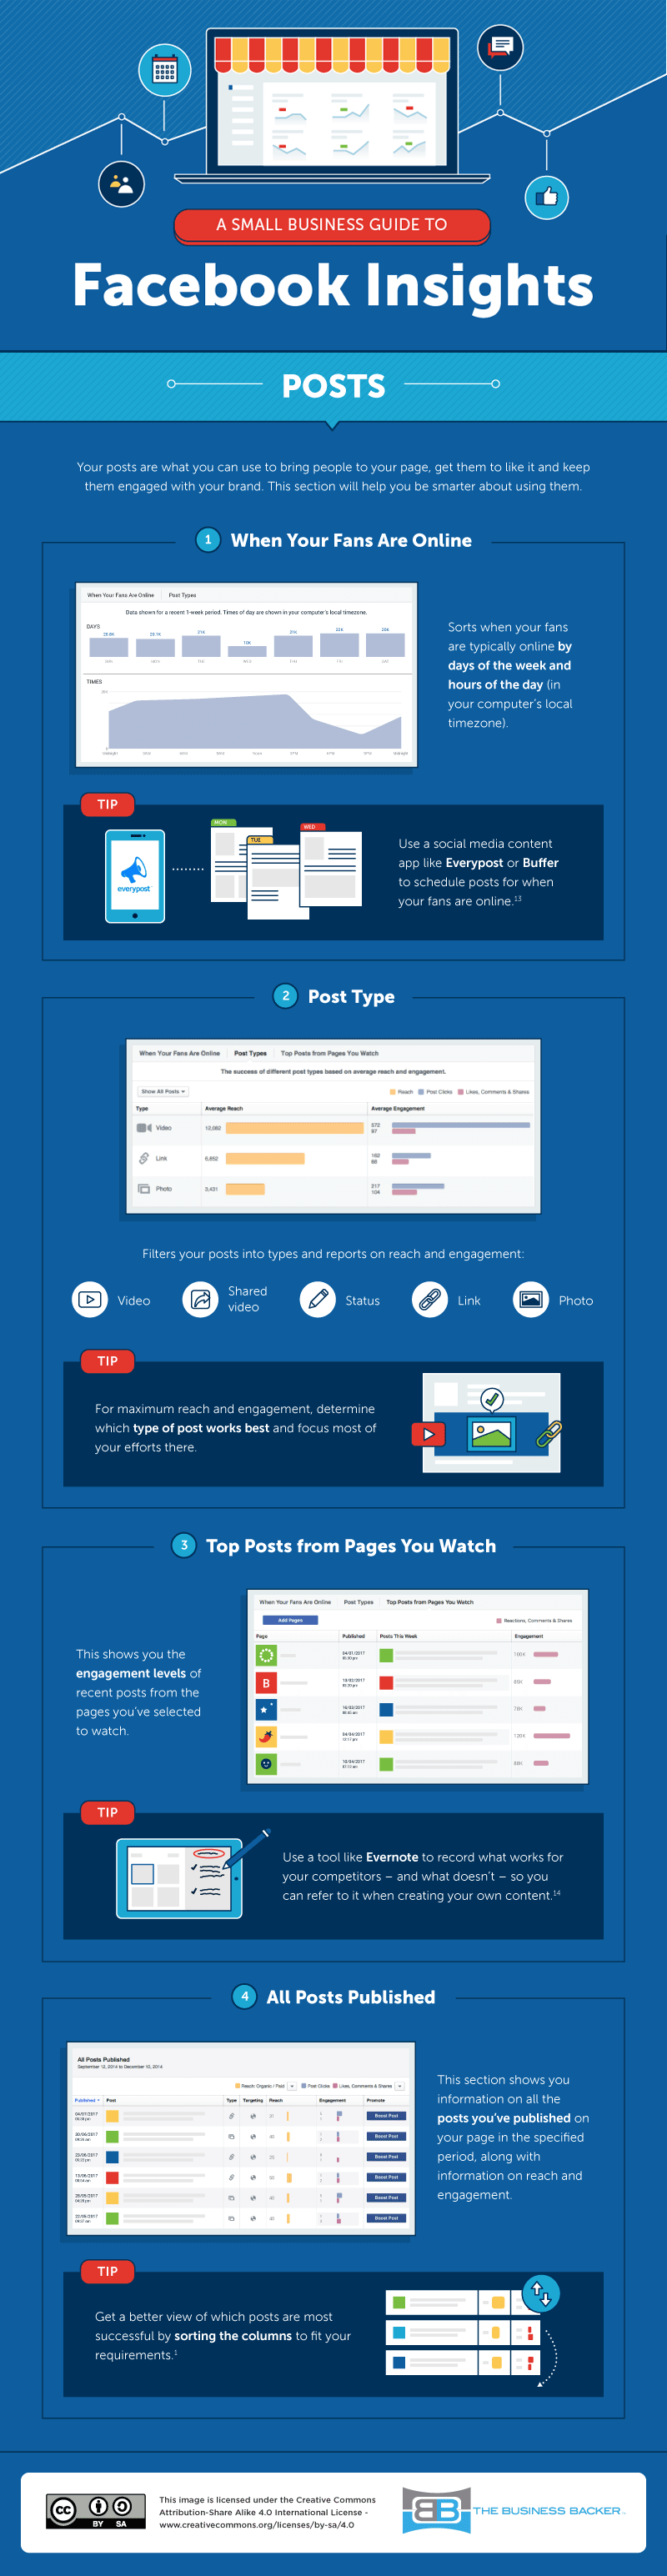 Facebook Insights Infographic for Improving your Page Posts